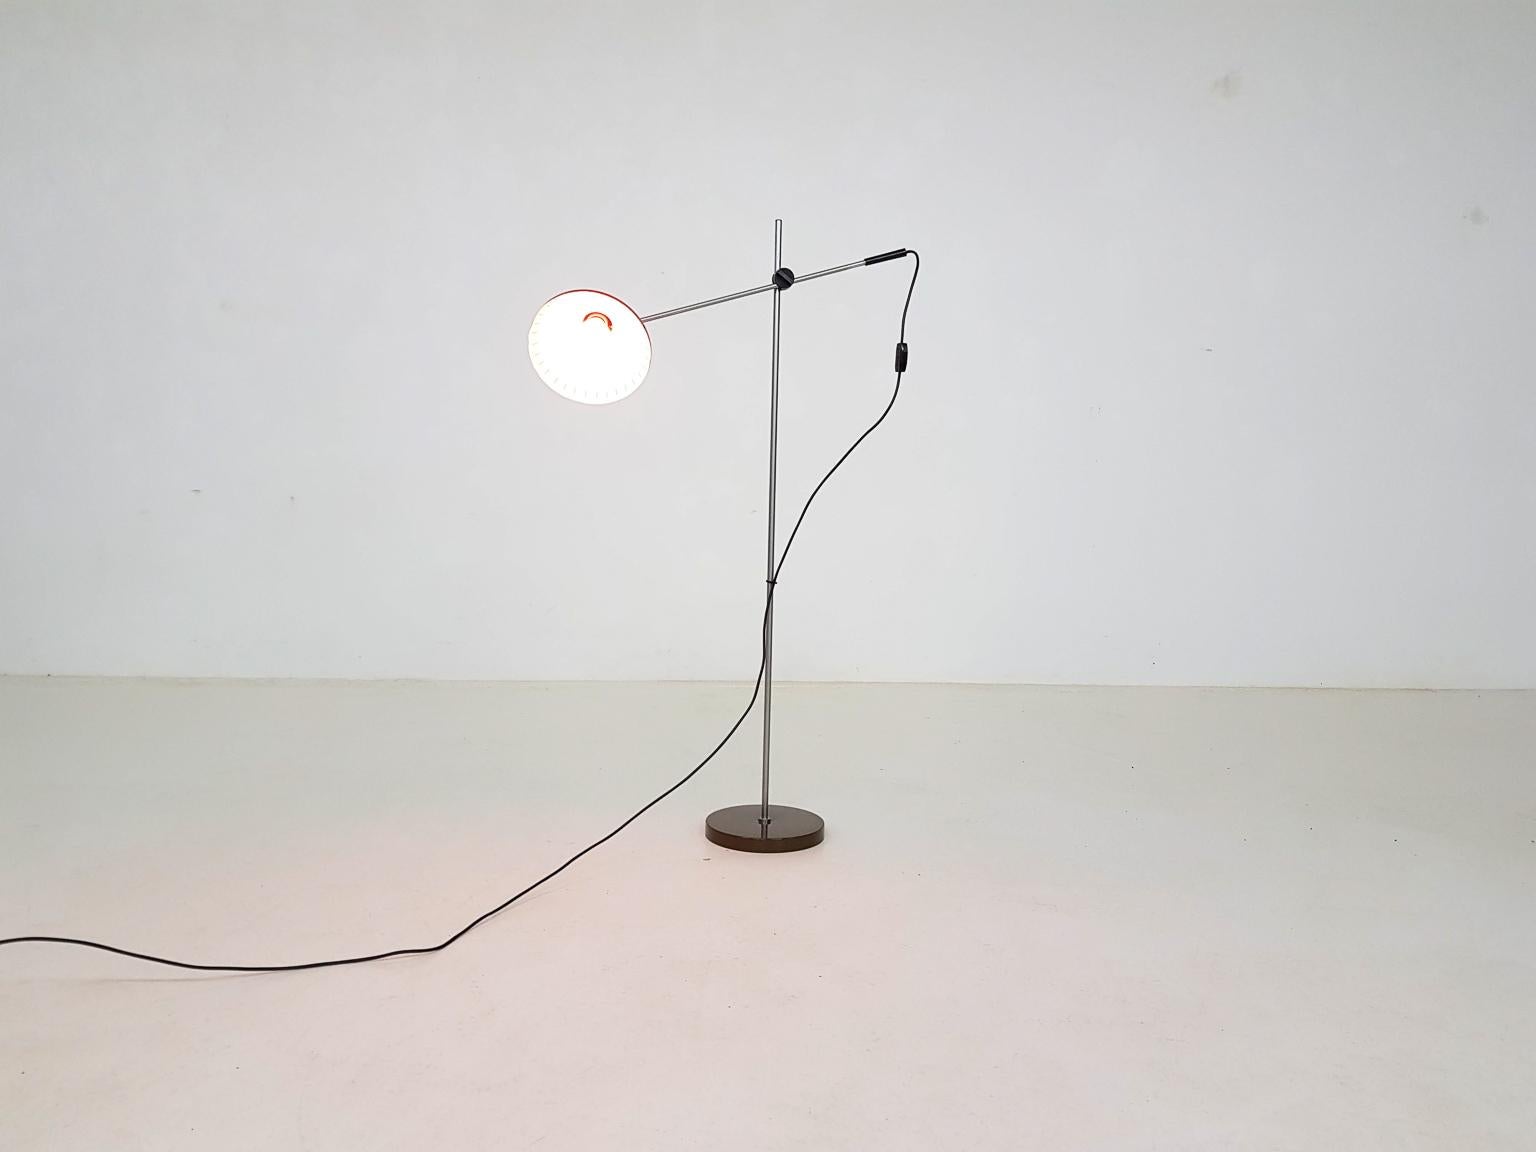 Brown metal adjustable floor lamp by Anvia, Dutch Design, 1950s

Beautiful metal floor lamp by Dutch lighting manufacturer Anvia. The lamp features a metal stem with an arm which holds a brown metal shade. The arm can be adjusted in height, so the